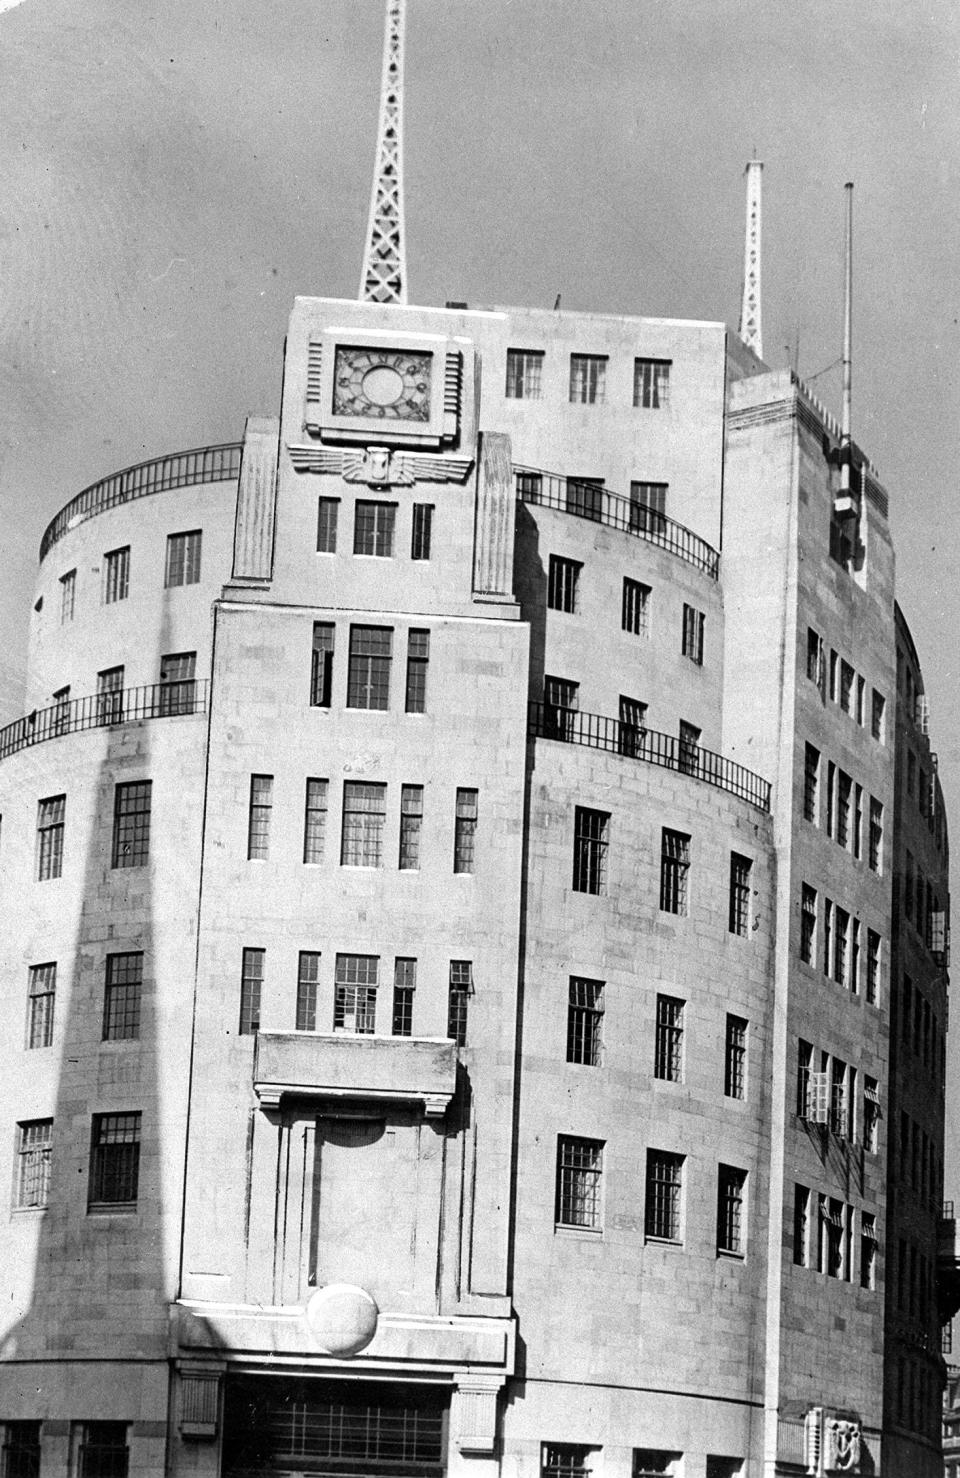 PA NEWS PHOTO 1935  BBC BROADCASTING HOUSE IN LANGHAM PLACE, LONDON